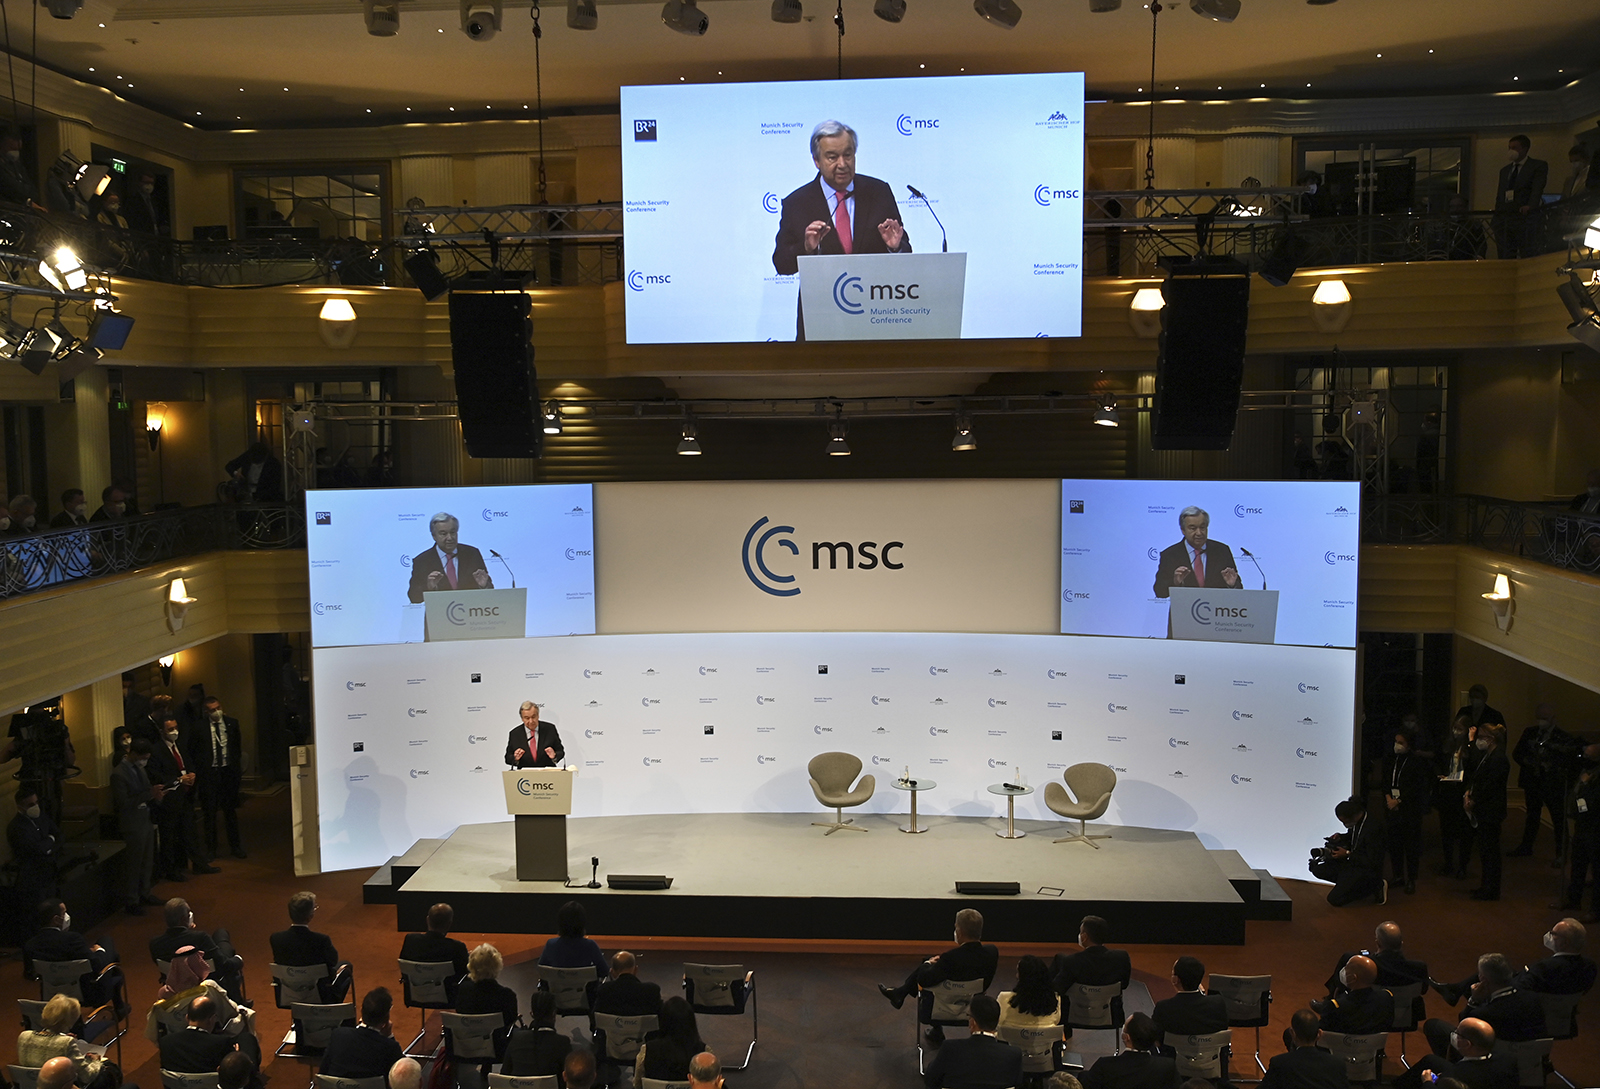 UN Secretary-General António Guterres at the Munich Security Conference in Germany, on February 18.